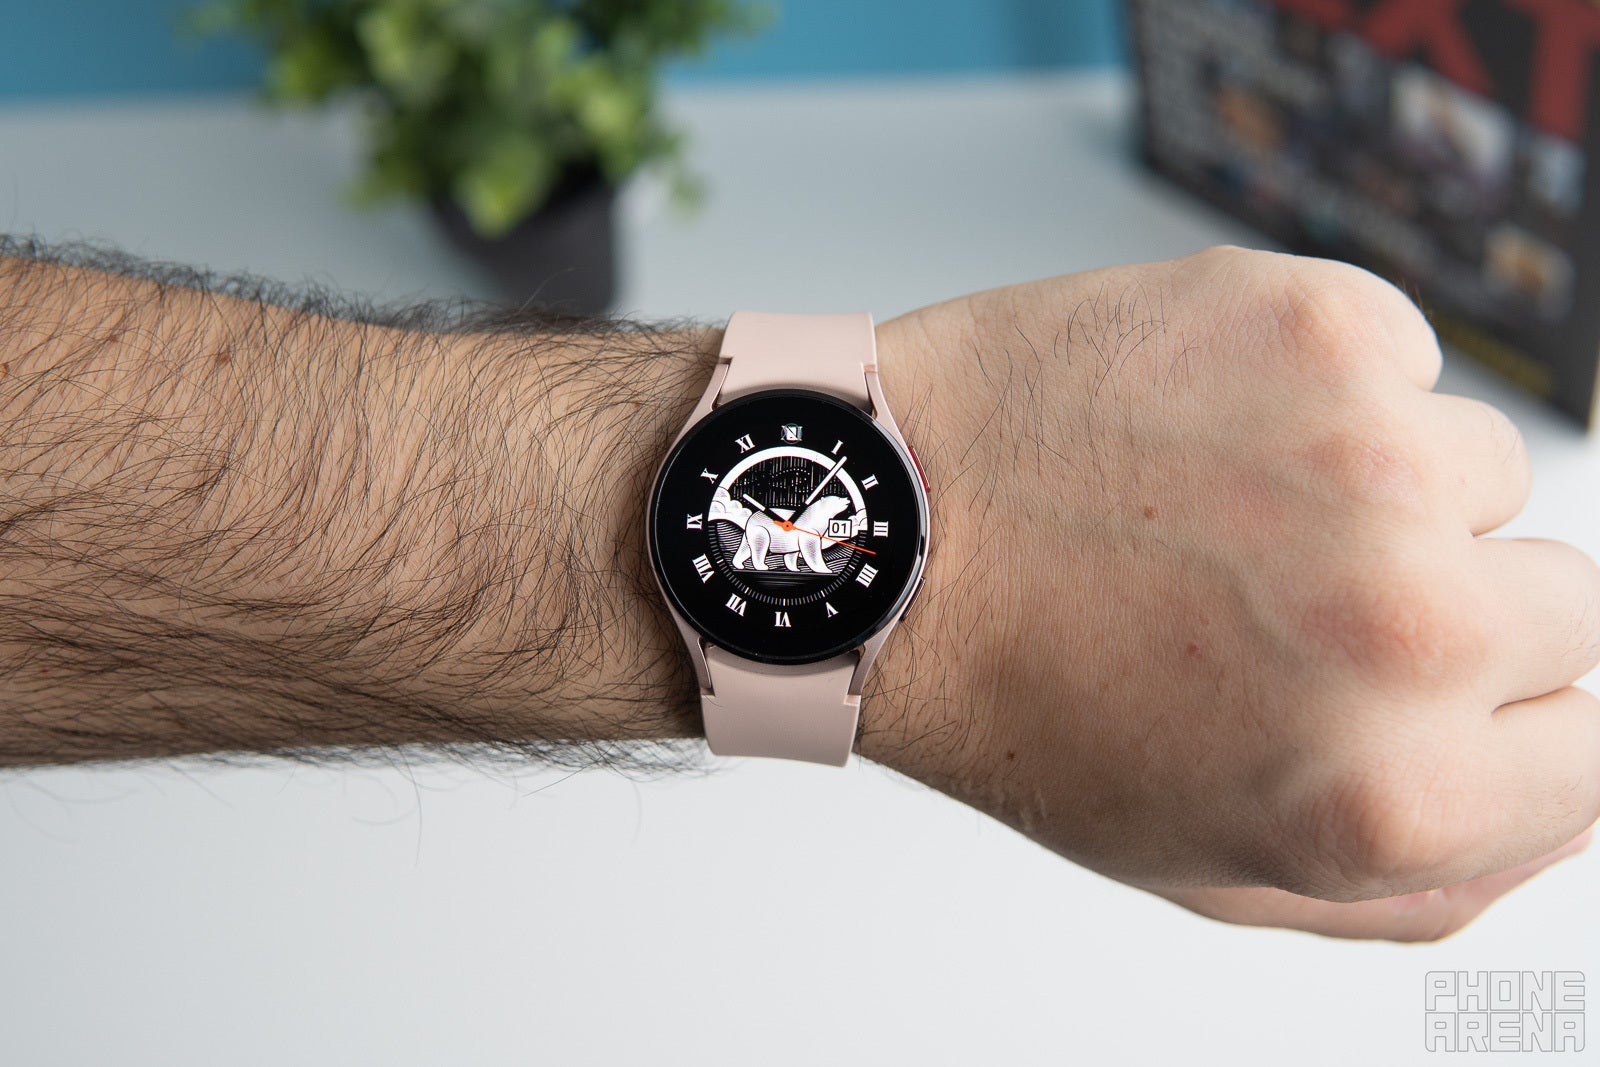 Samsung Galaxy Watch 4 Hands-on Review: Your Choice of Style